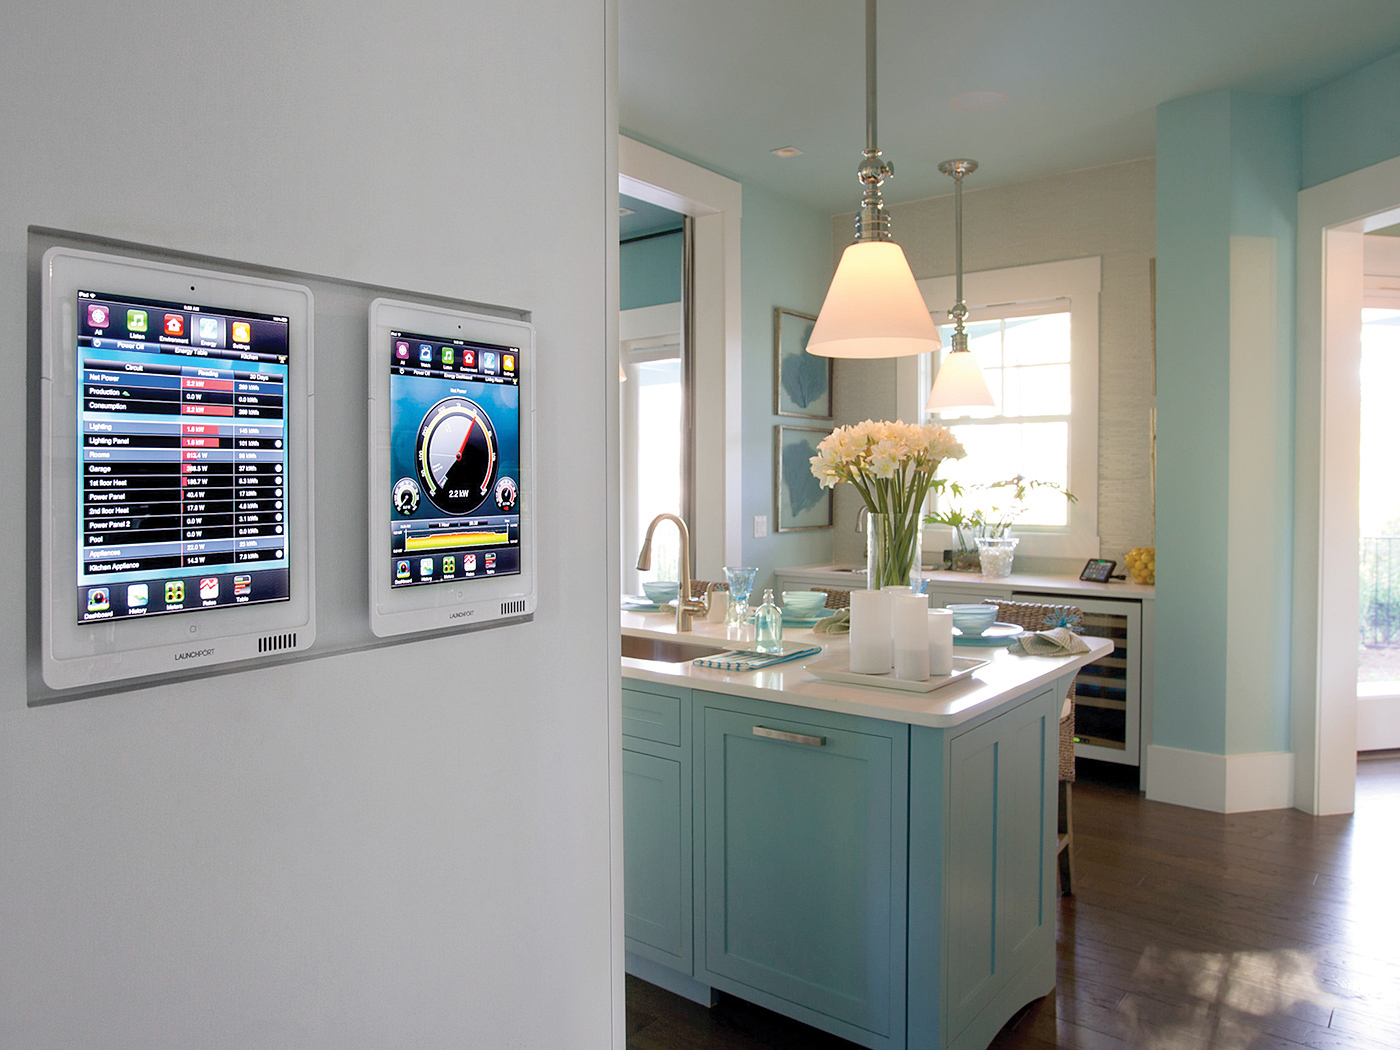 Glenn Layton Homes’ 2013 HGTV Smart House included wall-mounted control panels. Four years later, the same home automation features can be controlled by hand-held devices.